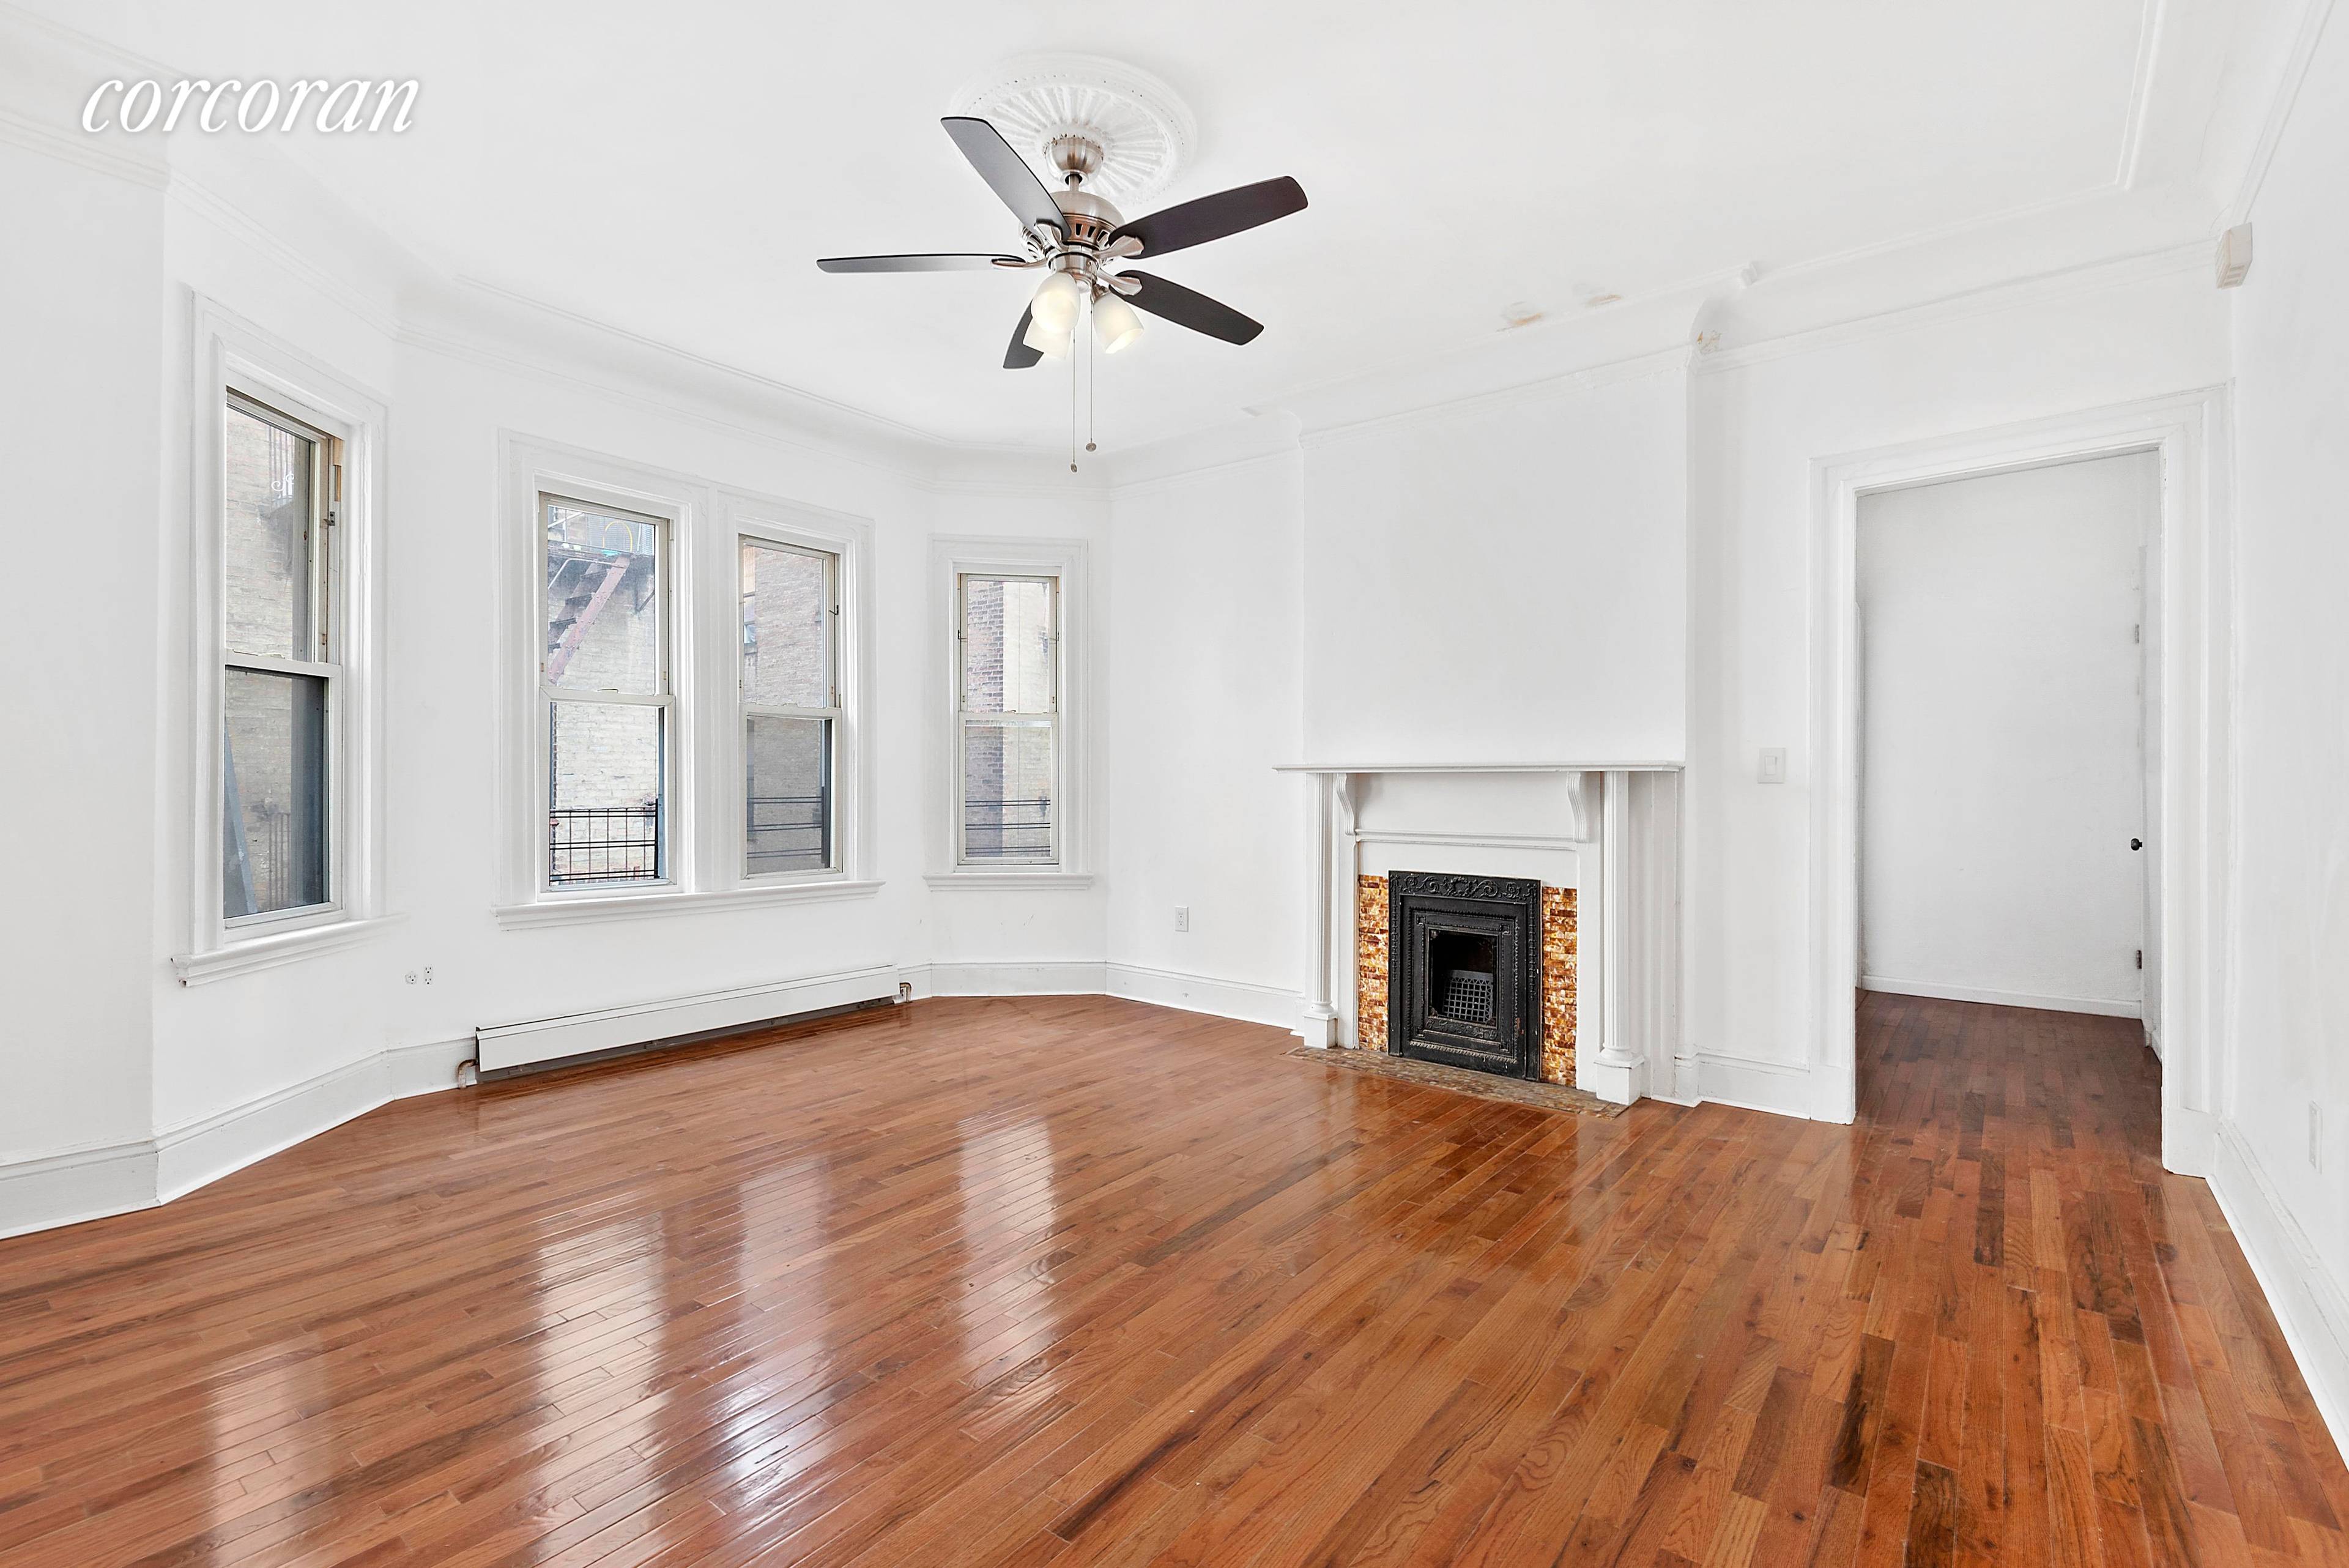 This extra large four bedroom apartment is located on trendy Cortelyou Rd.